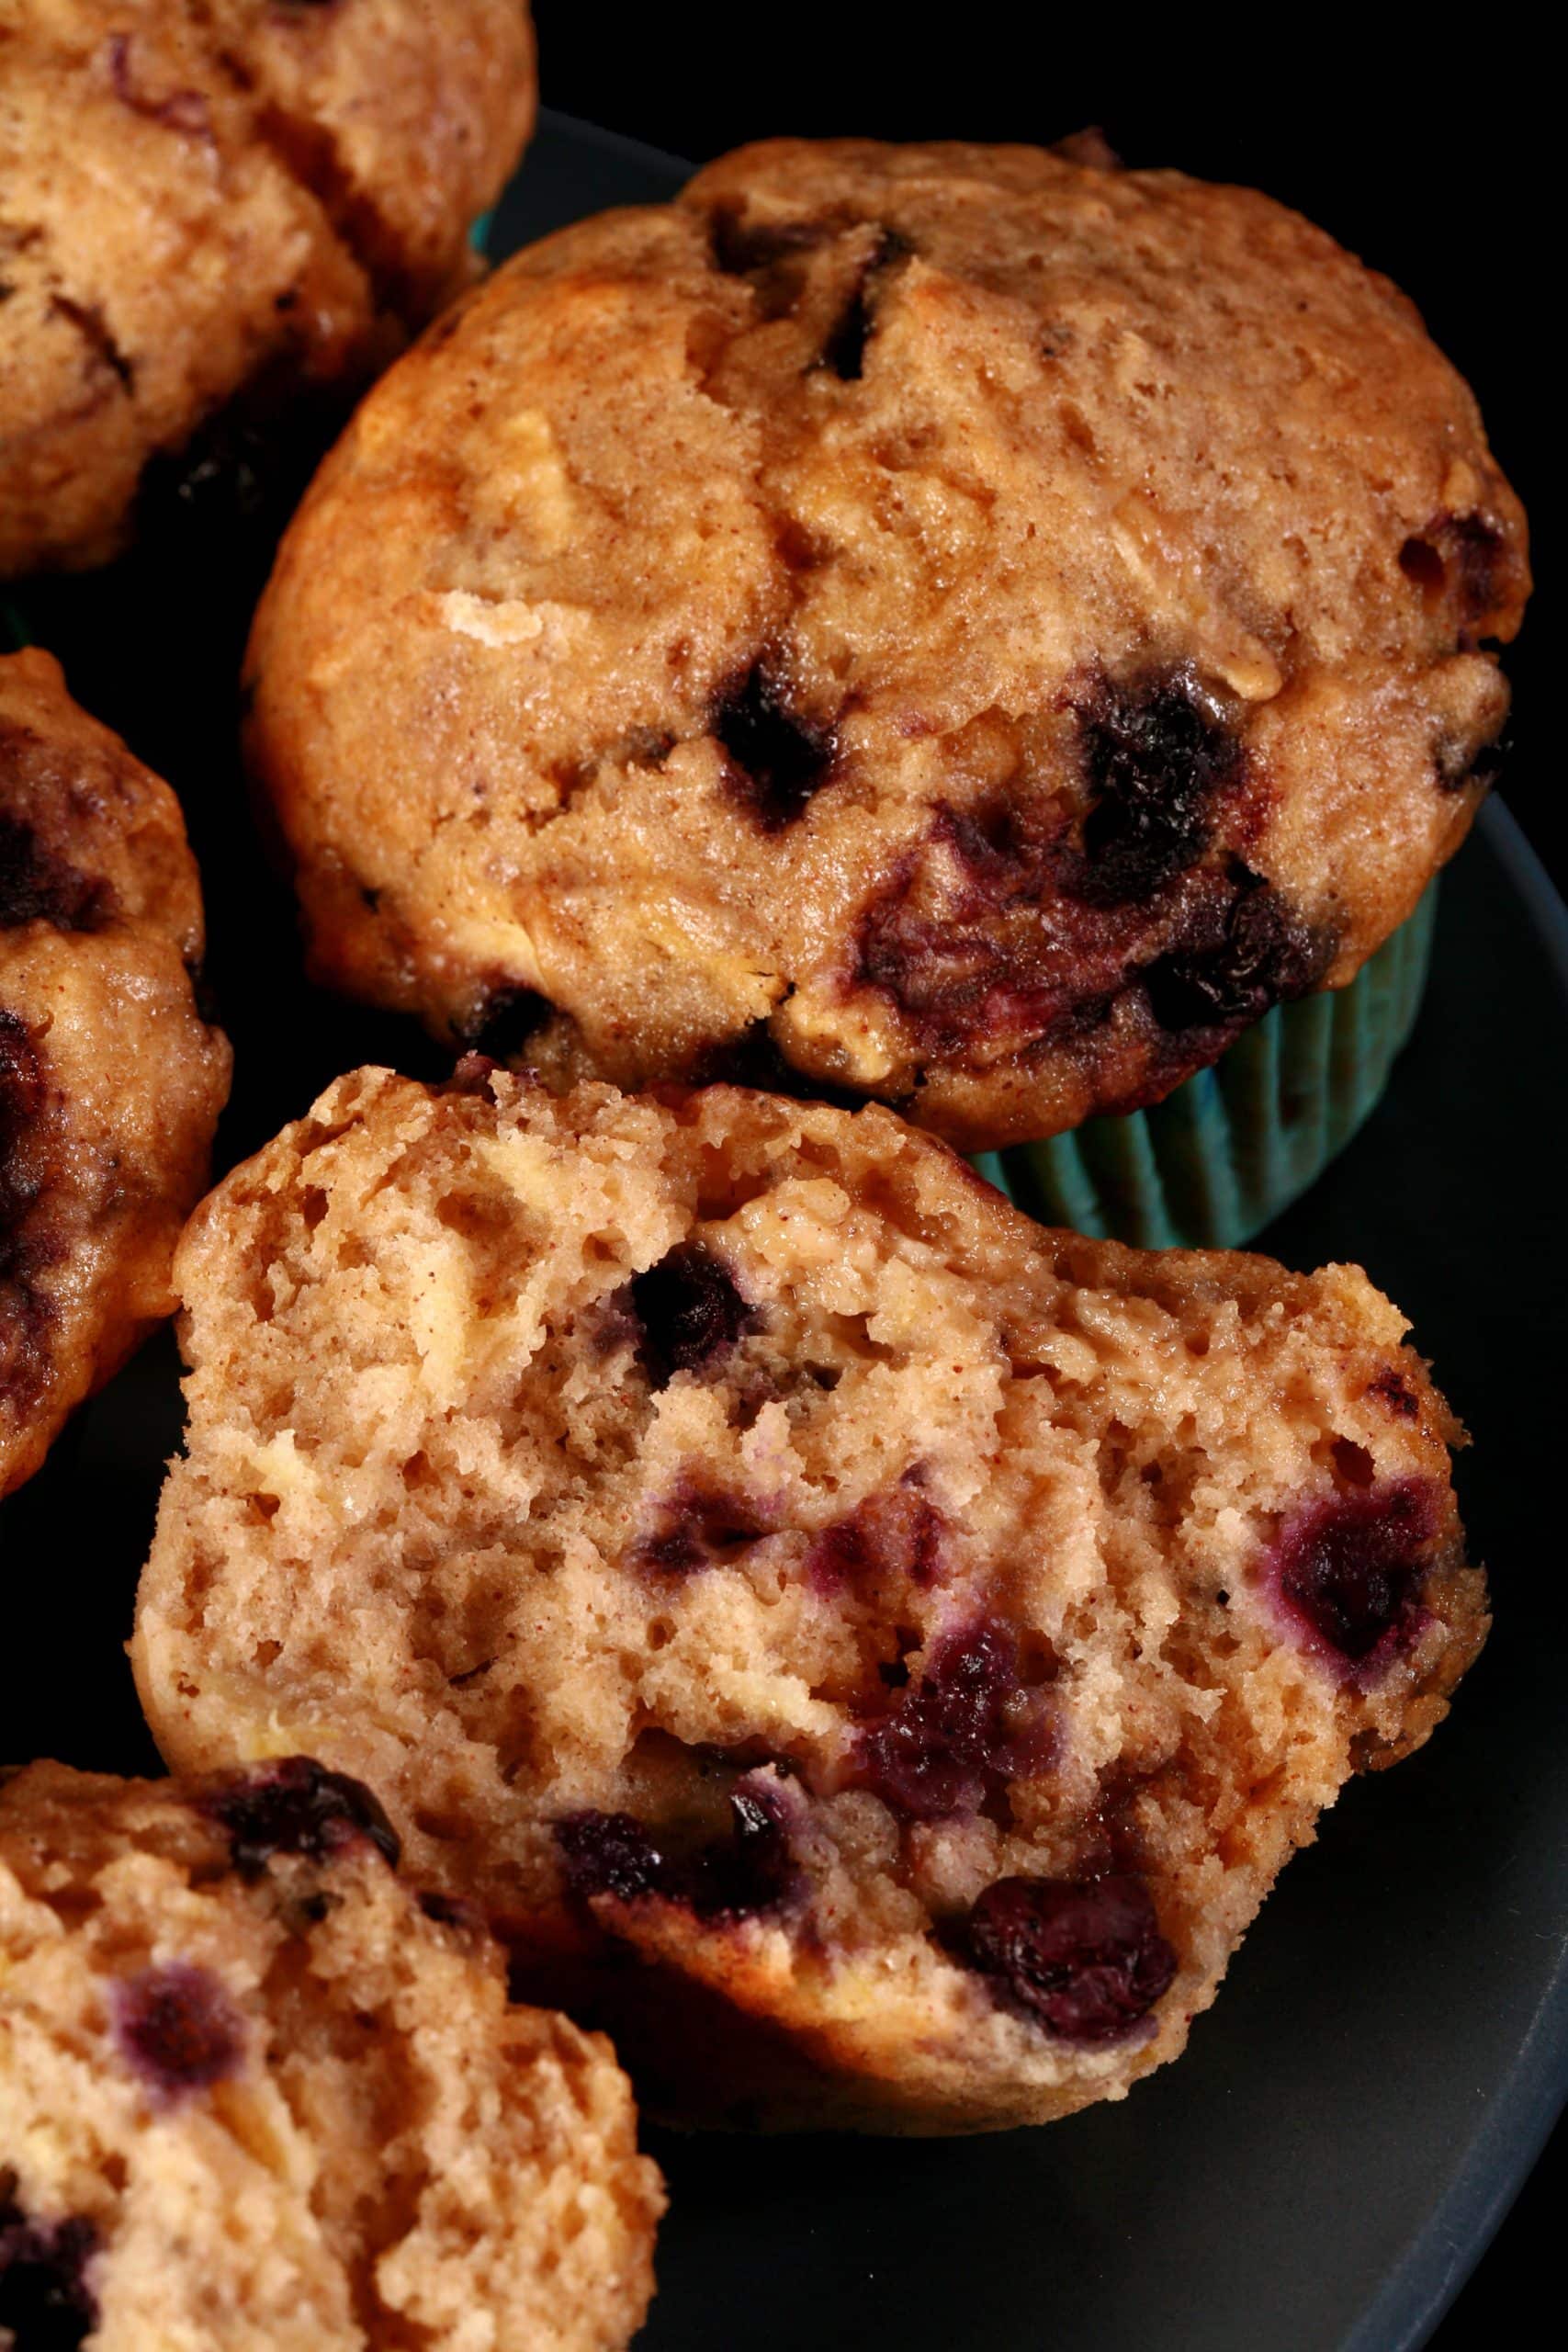 A plate of blueberry apple muffins.